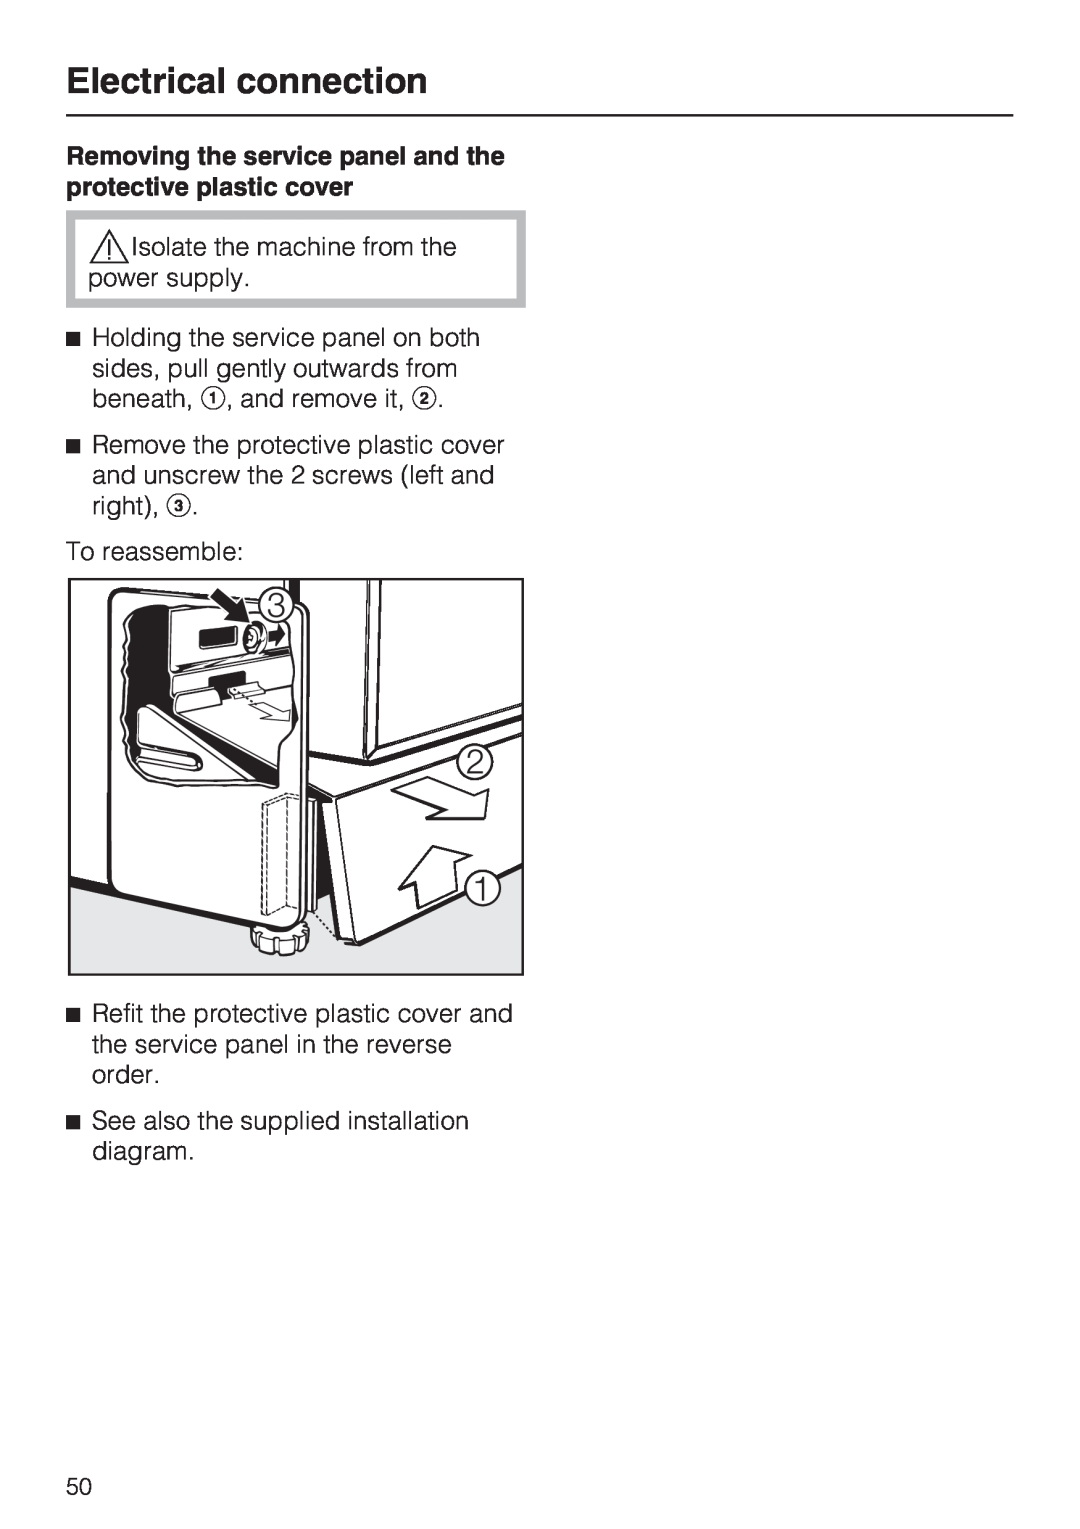 Miele G 7856, 06 868 521 installation instructions Electrical connection, Isolate the machine from the power supply 